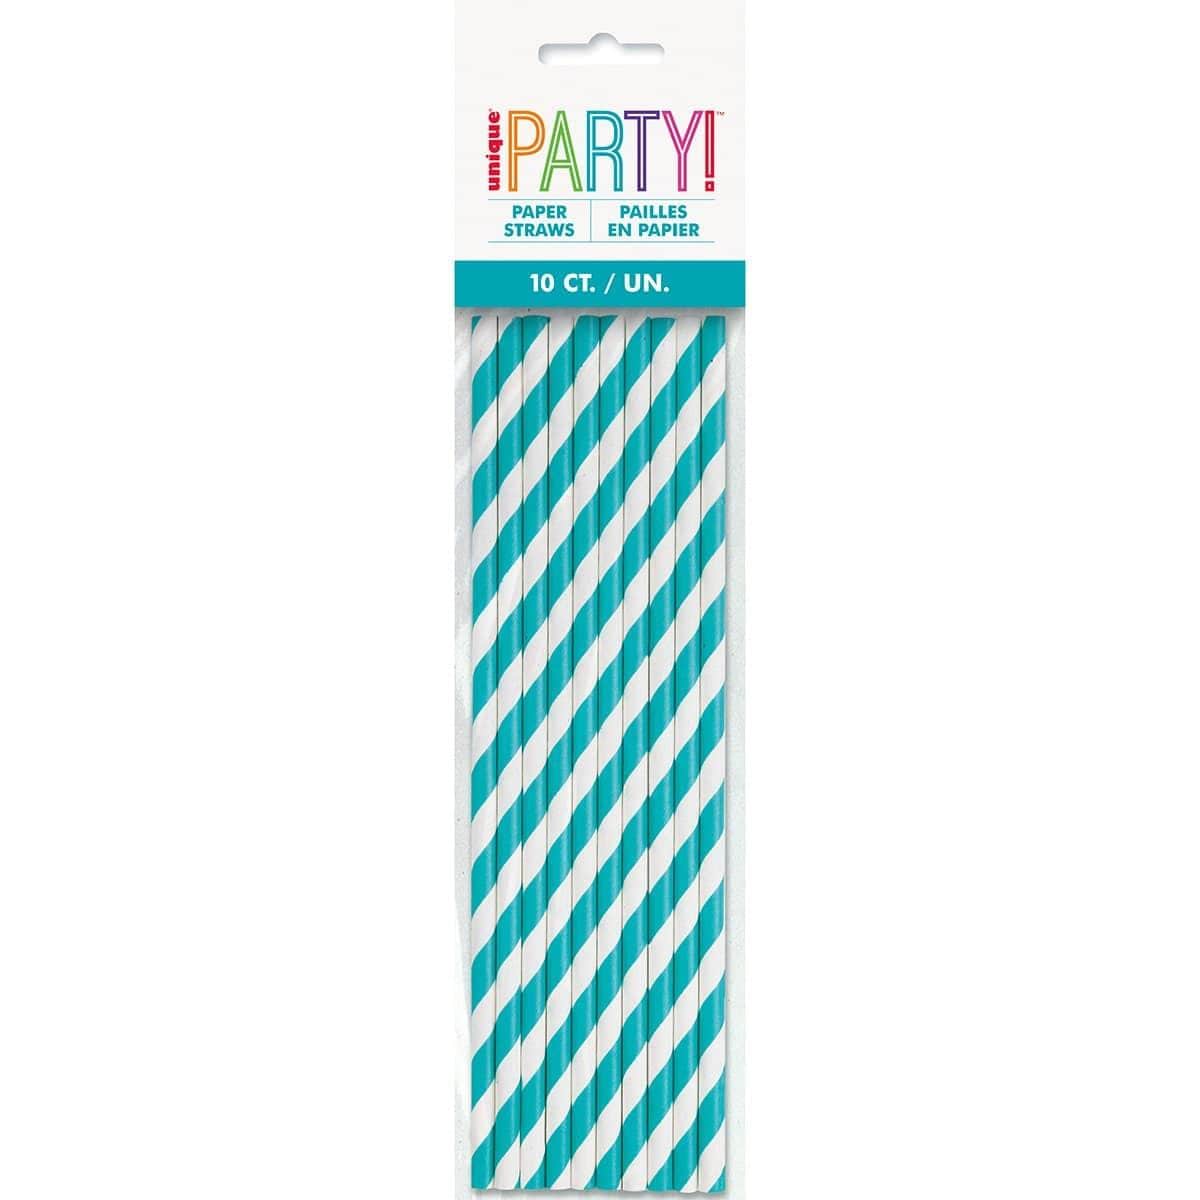 Buy Plasticware Paper Straw With Stripes 10/pkg - Teal sold at Party Expert